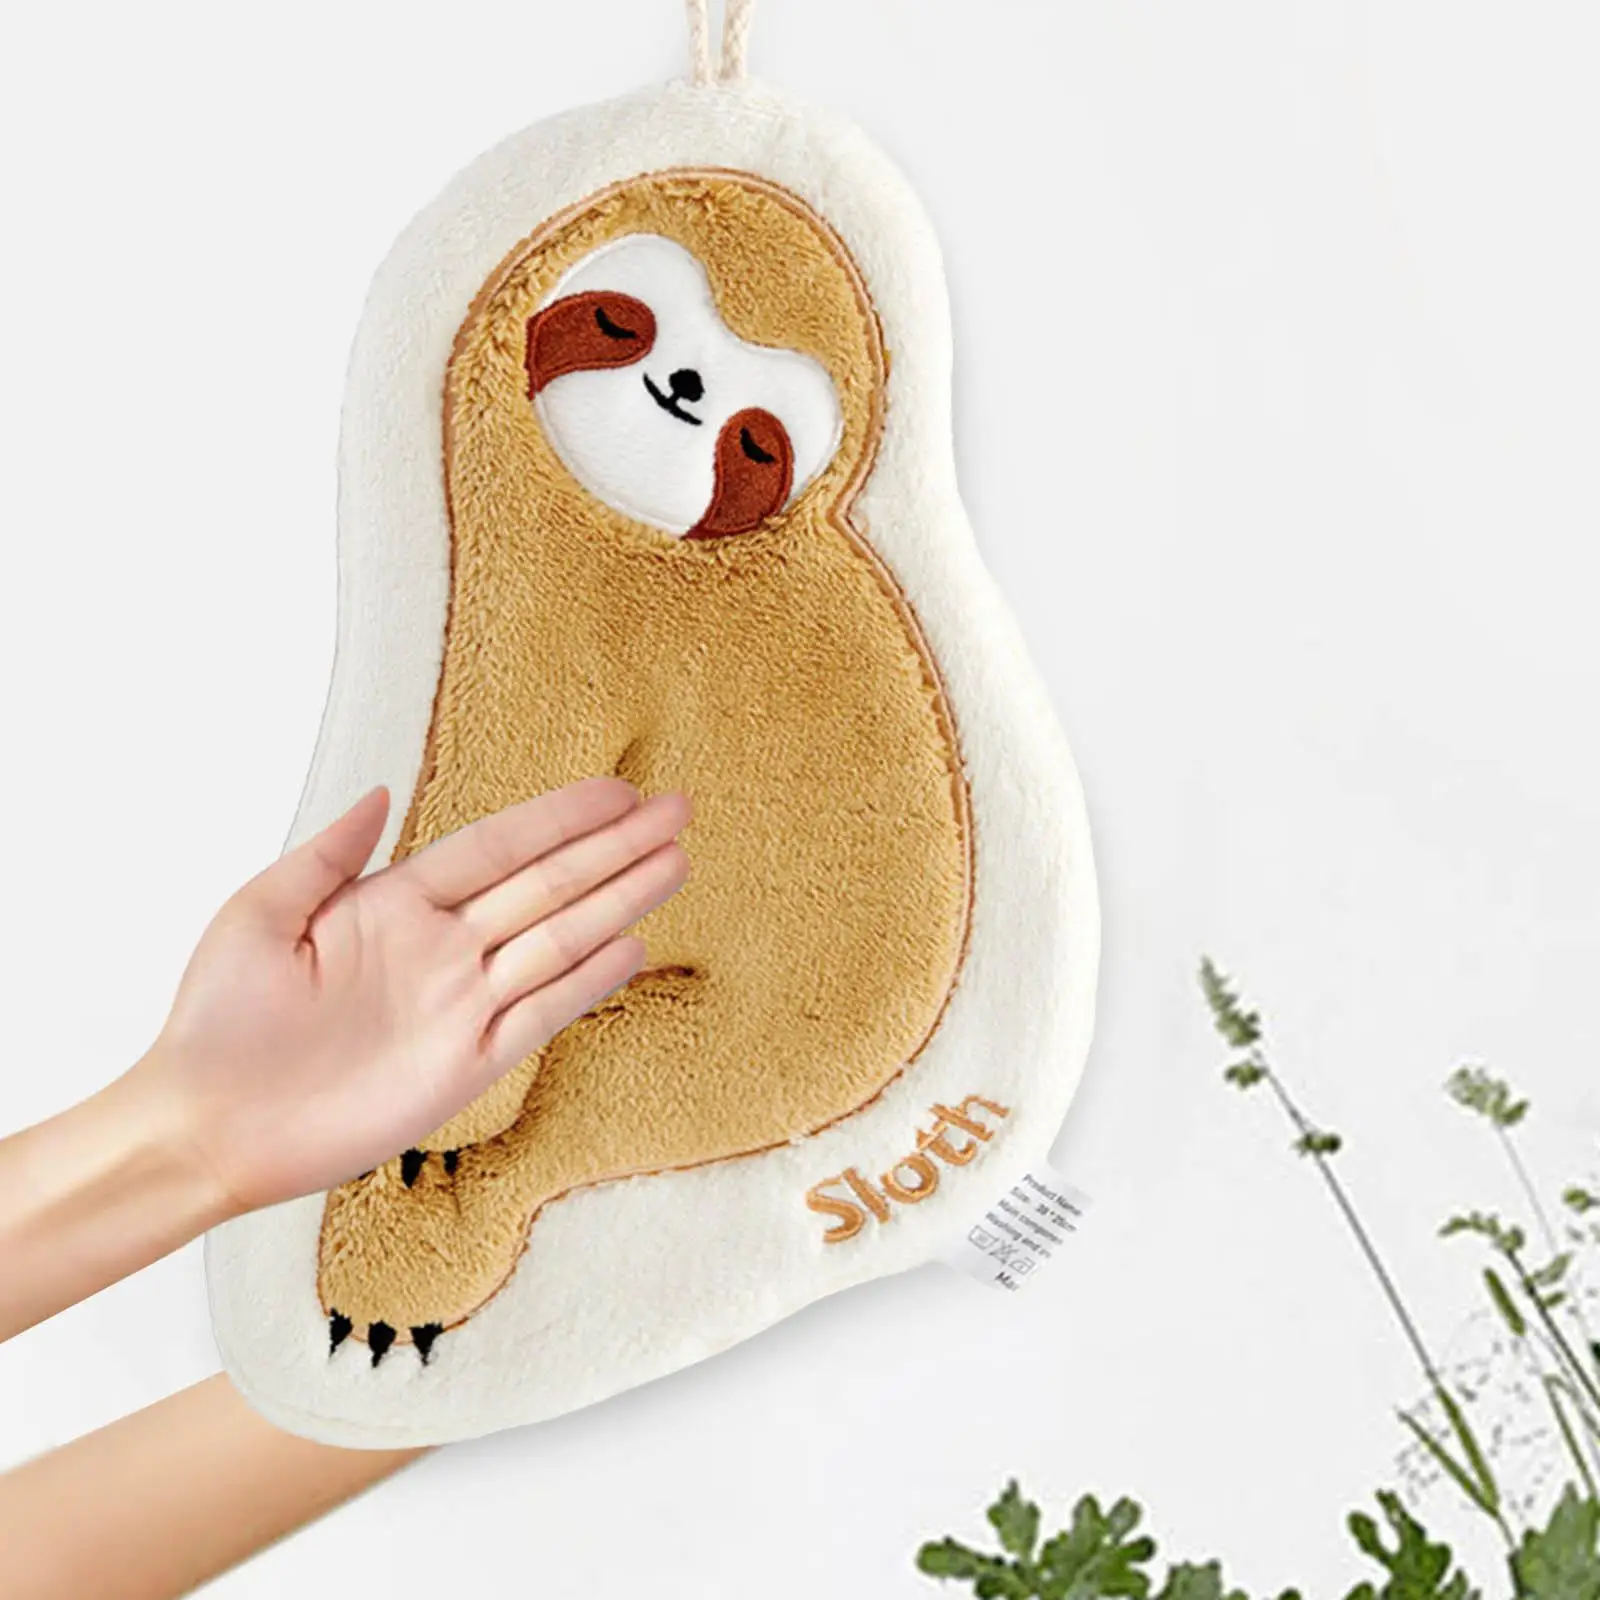 Funny Sloth Hanging Hand Towel Decorative Animal Hand Towels Highly Absorbent